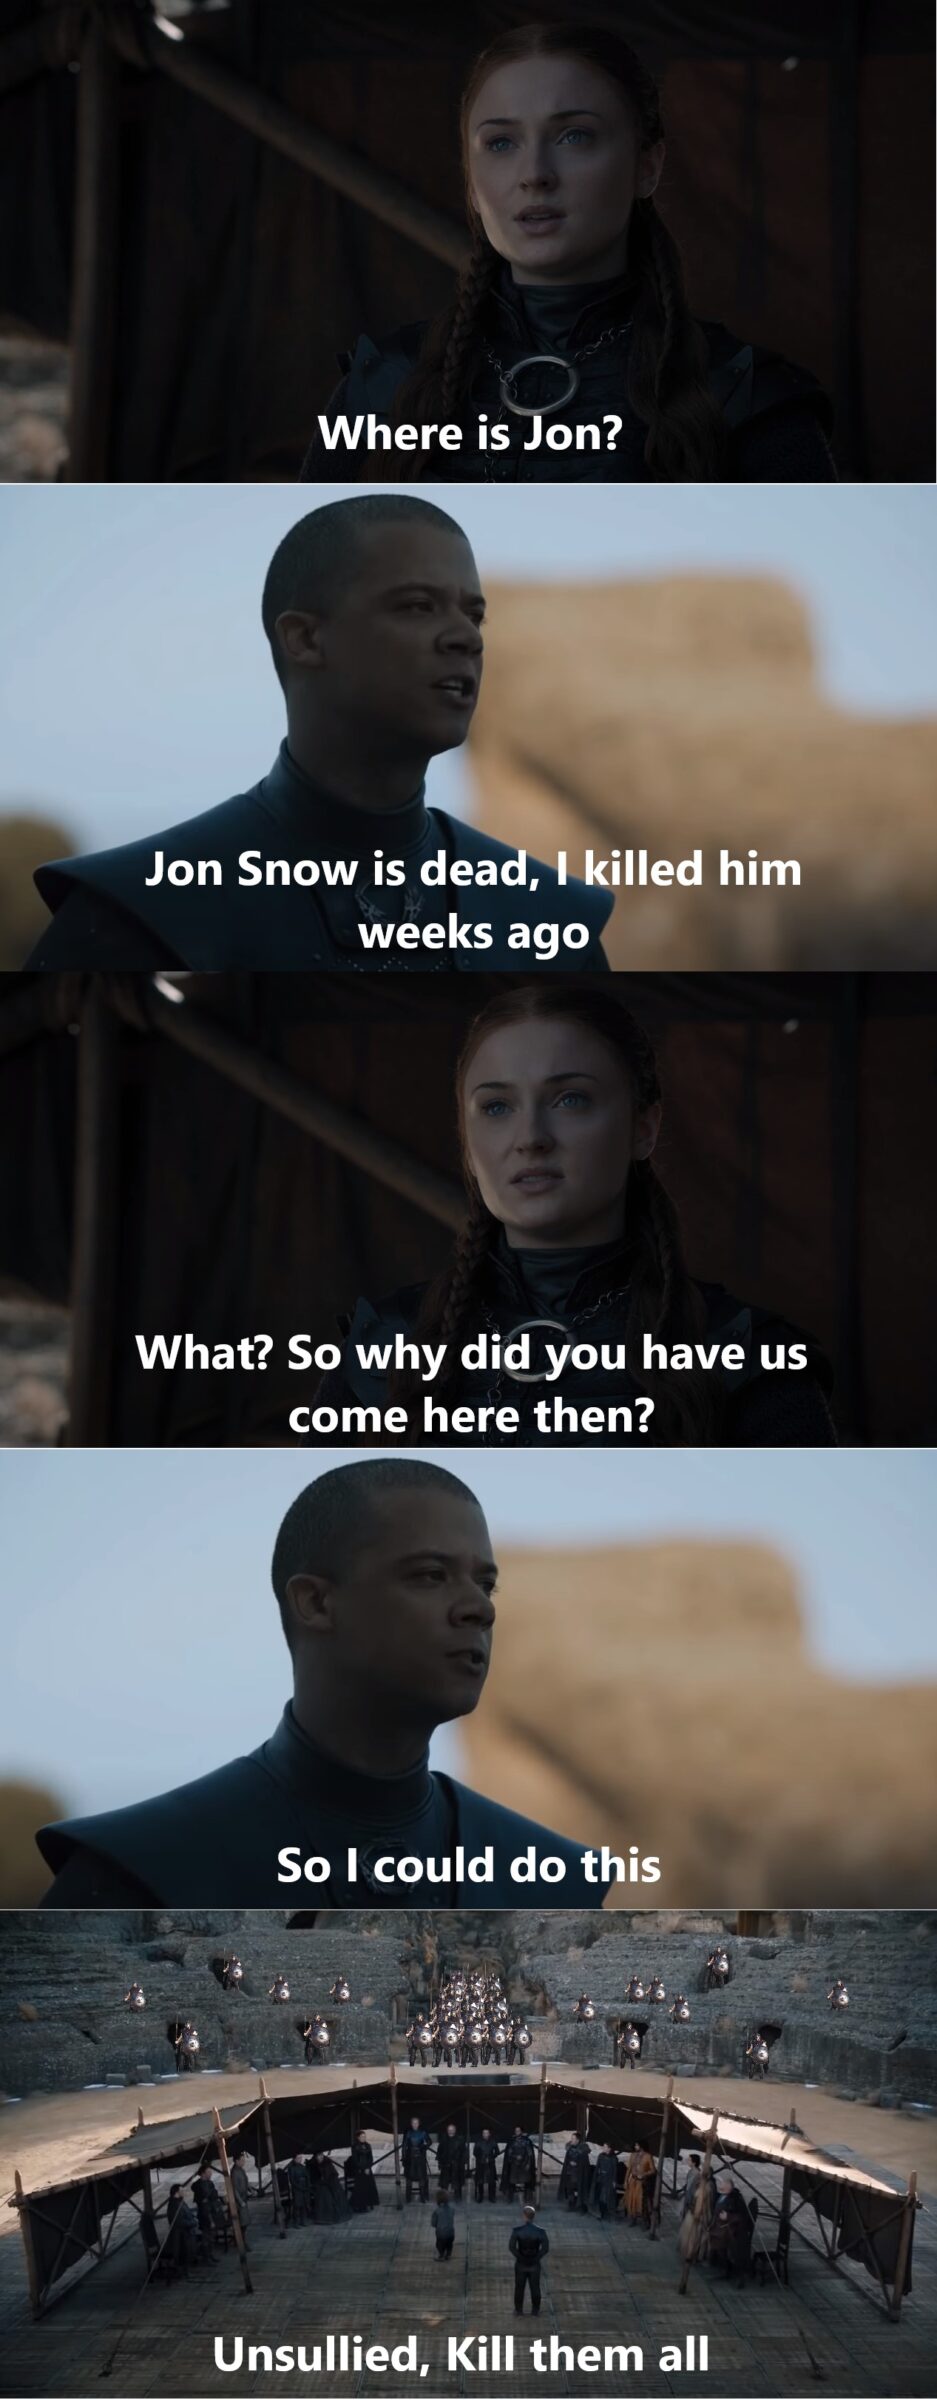 Game of thrones, Jon, Dany, Grey Worm, Dothraki, Bran Game of thrones memes Game of thrones, Jon, Dany, Grey Worm, Dothraki, Bran text: Where is on? Jon Snow is deadhl killed him weeks ago What? So why di@you have us come here then? could do this Unsullied, Kill them all 